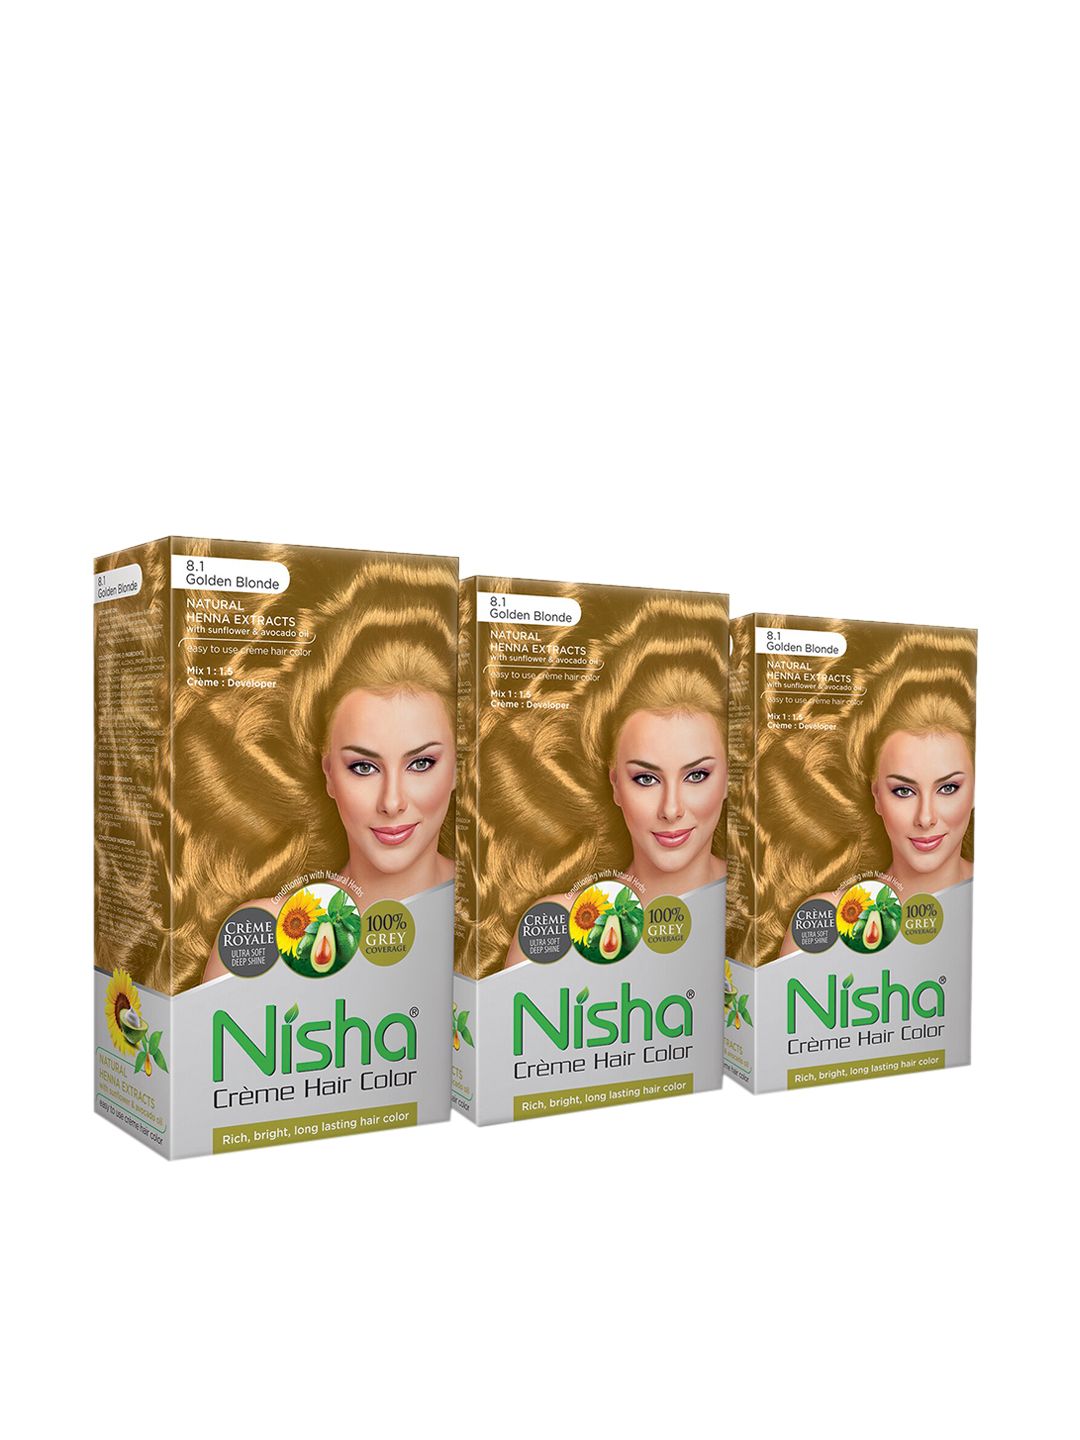 Nisha Set of 3 Creme Hair Colour 450g - Golden Blonde Price in India